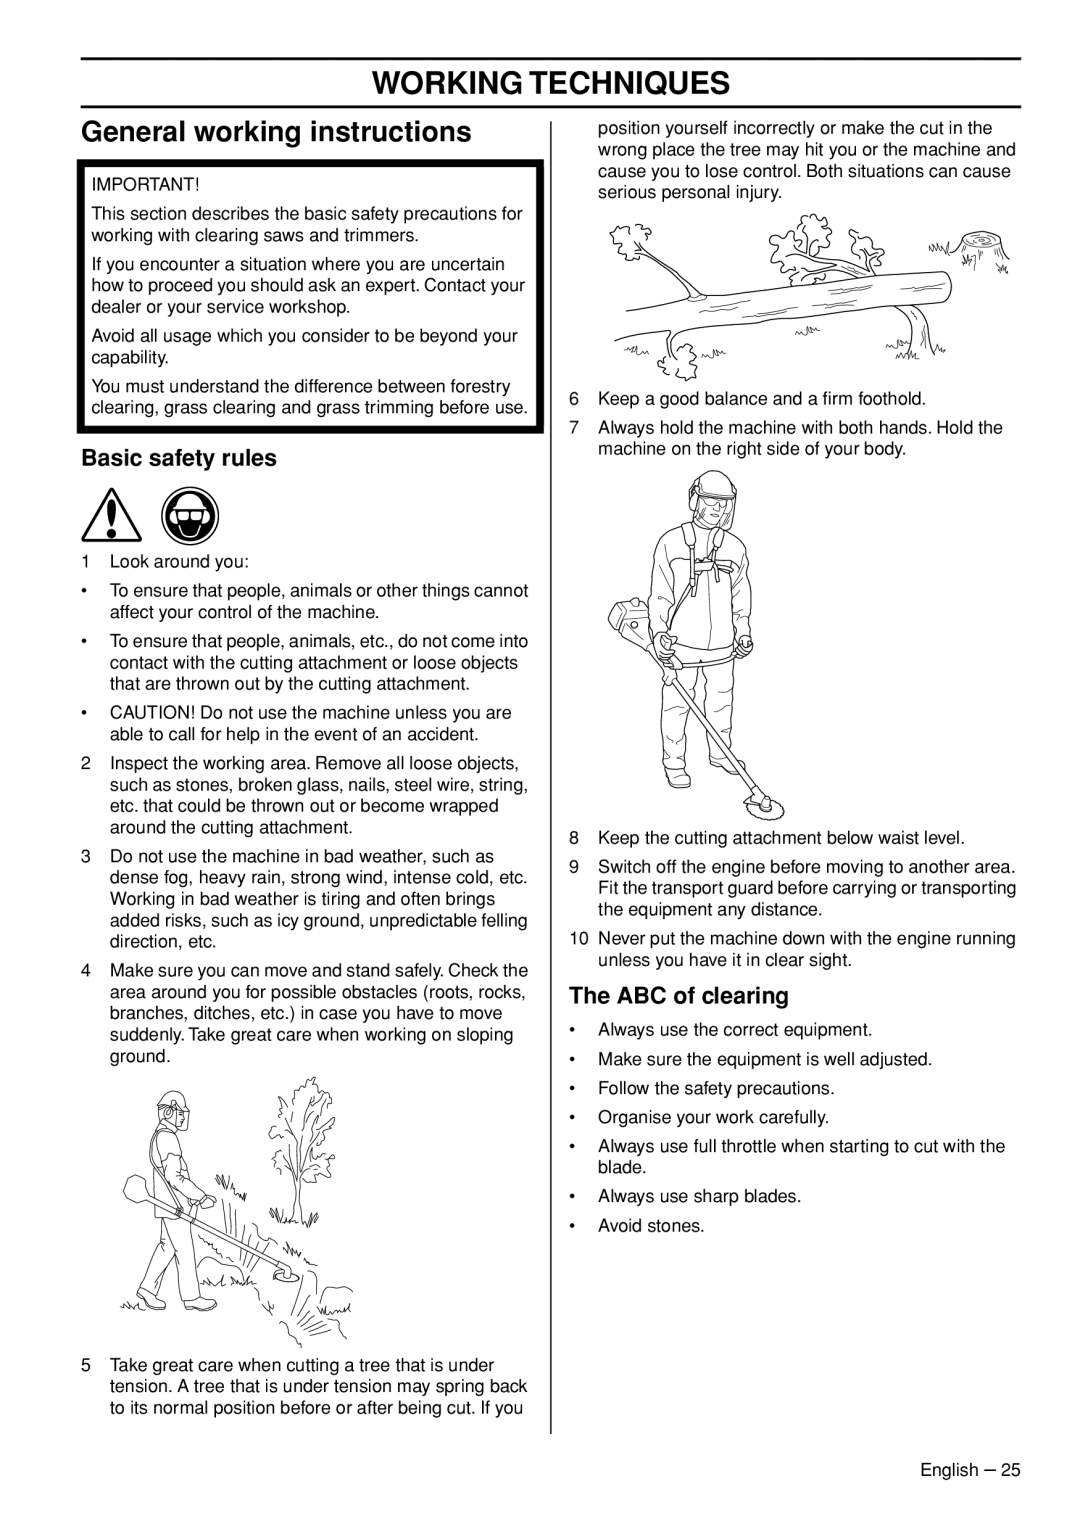 Husqvarna 335LX manual Working Techniques, General working instructions, Basic safety rules, The ABC of clearing 